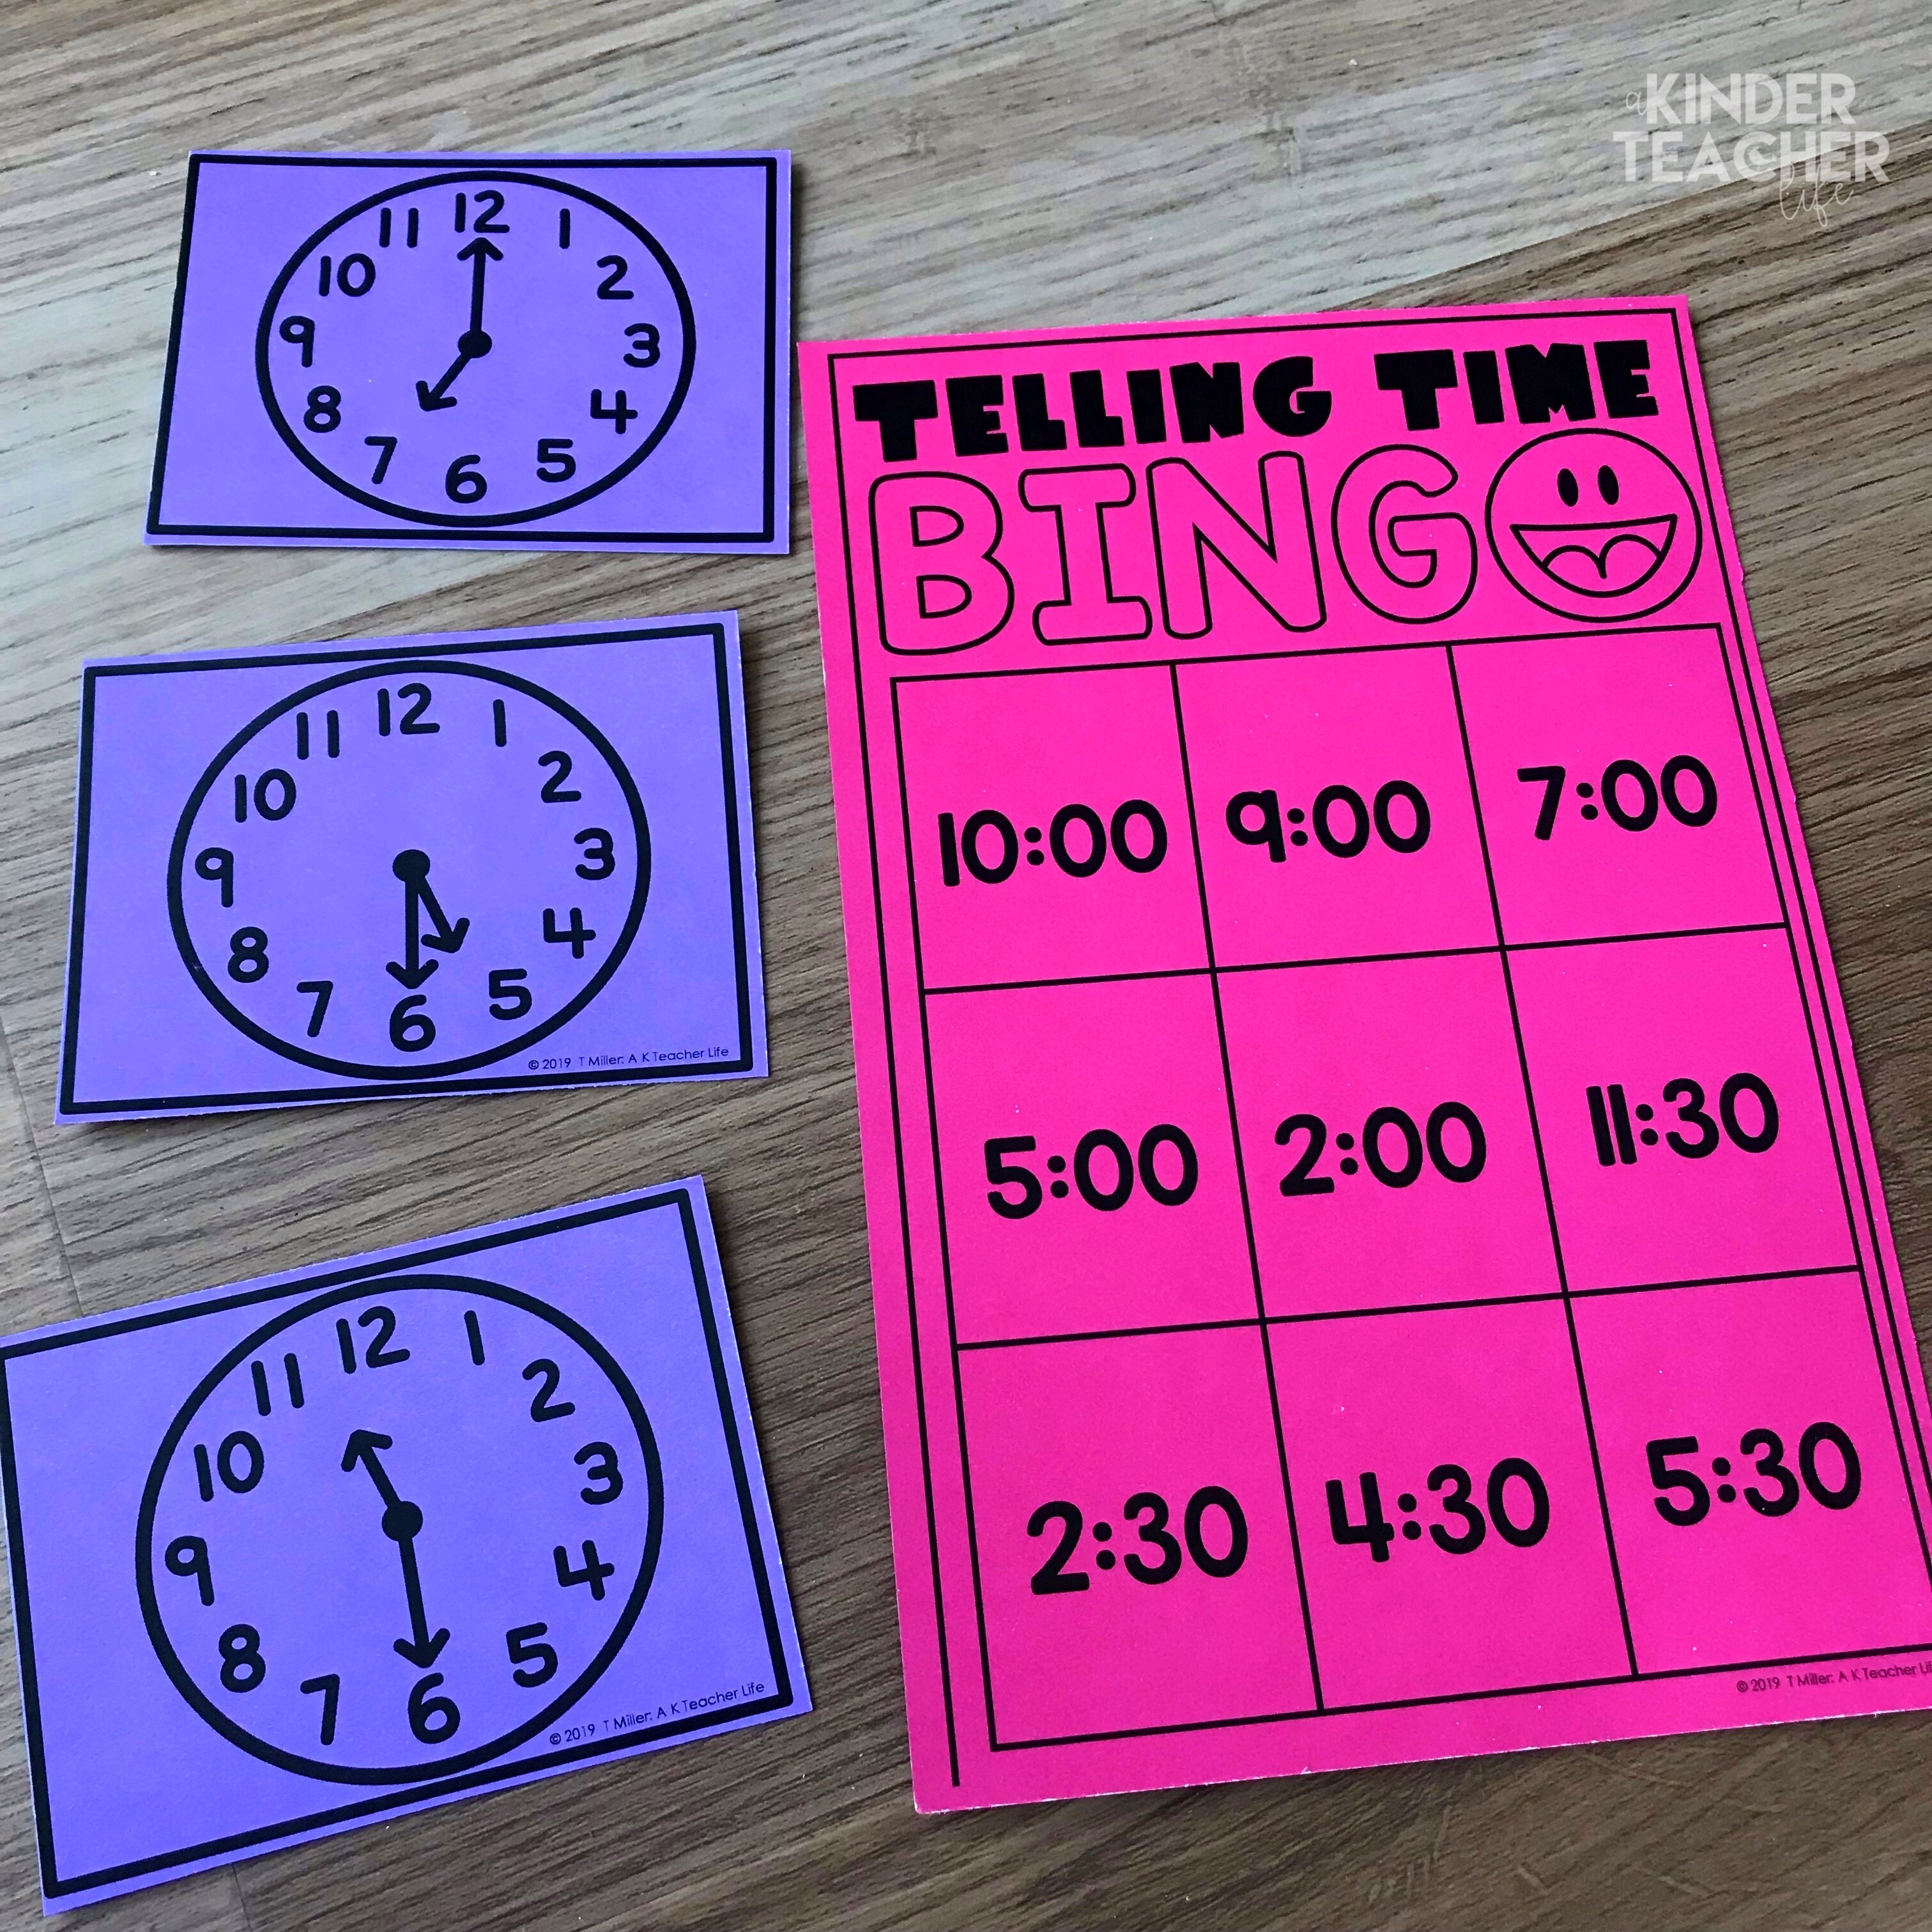 Telling time BINGO - Hands-on telling time math center activities for first grade students. 